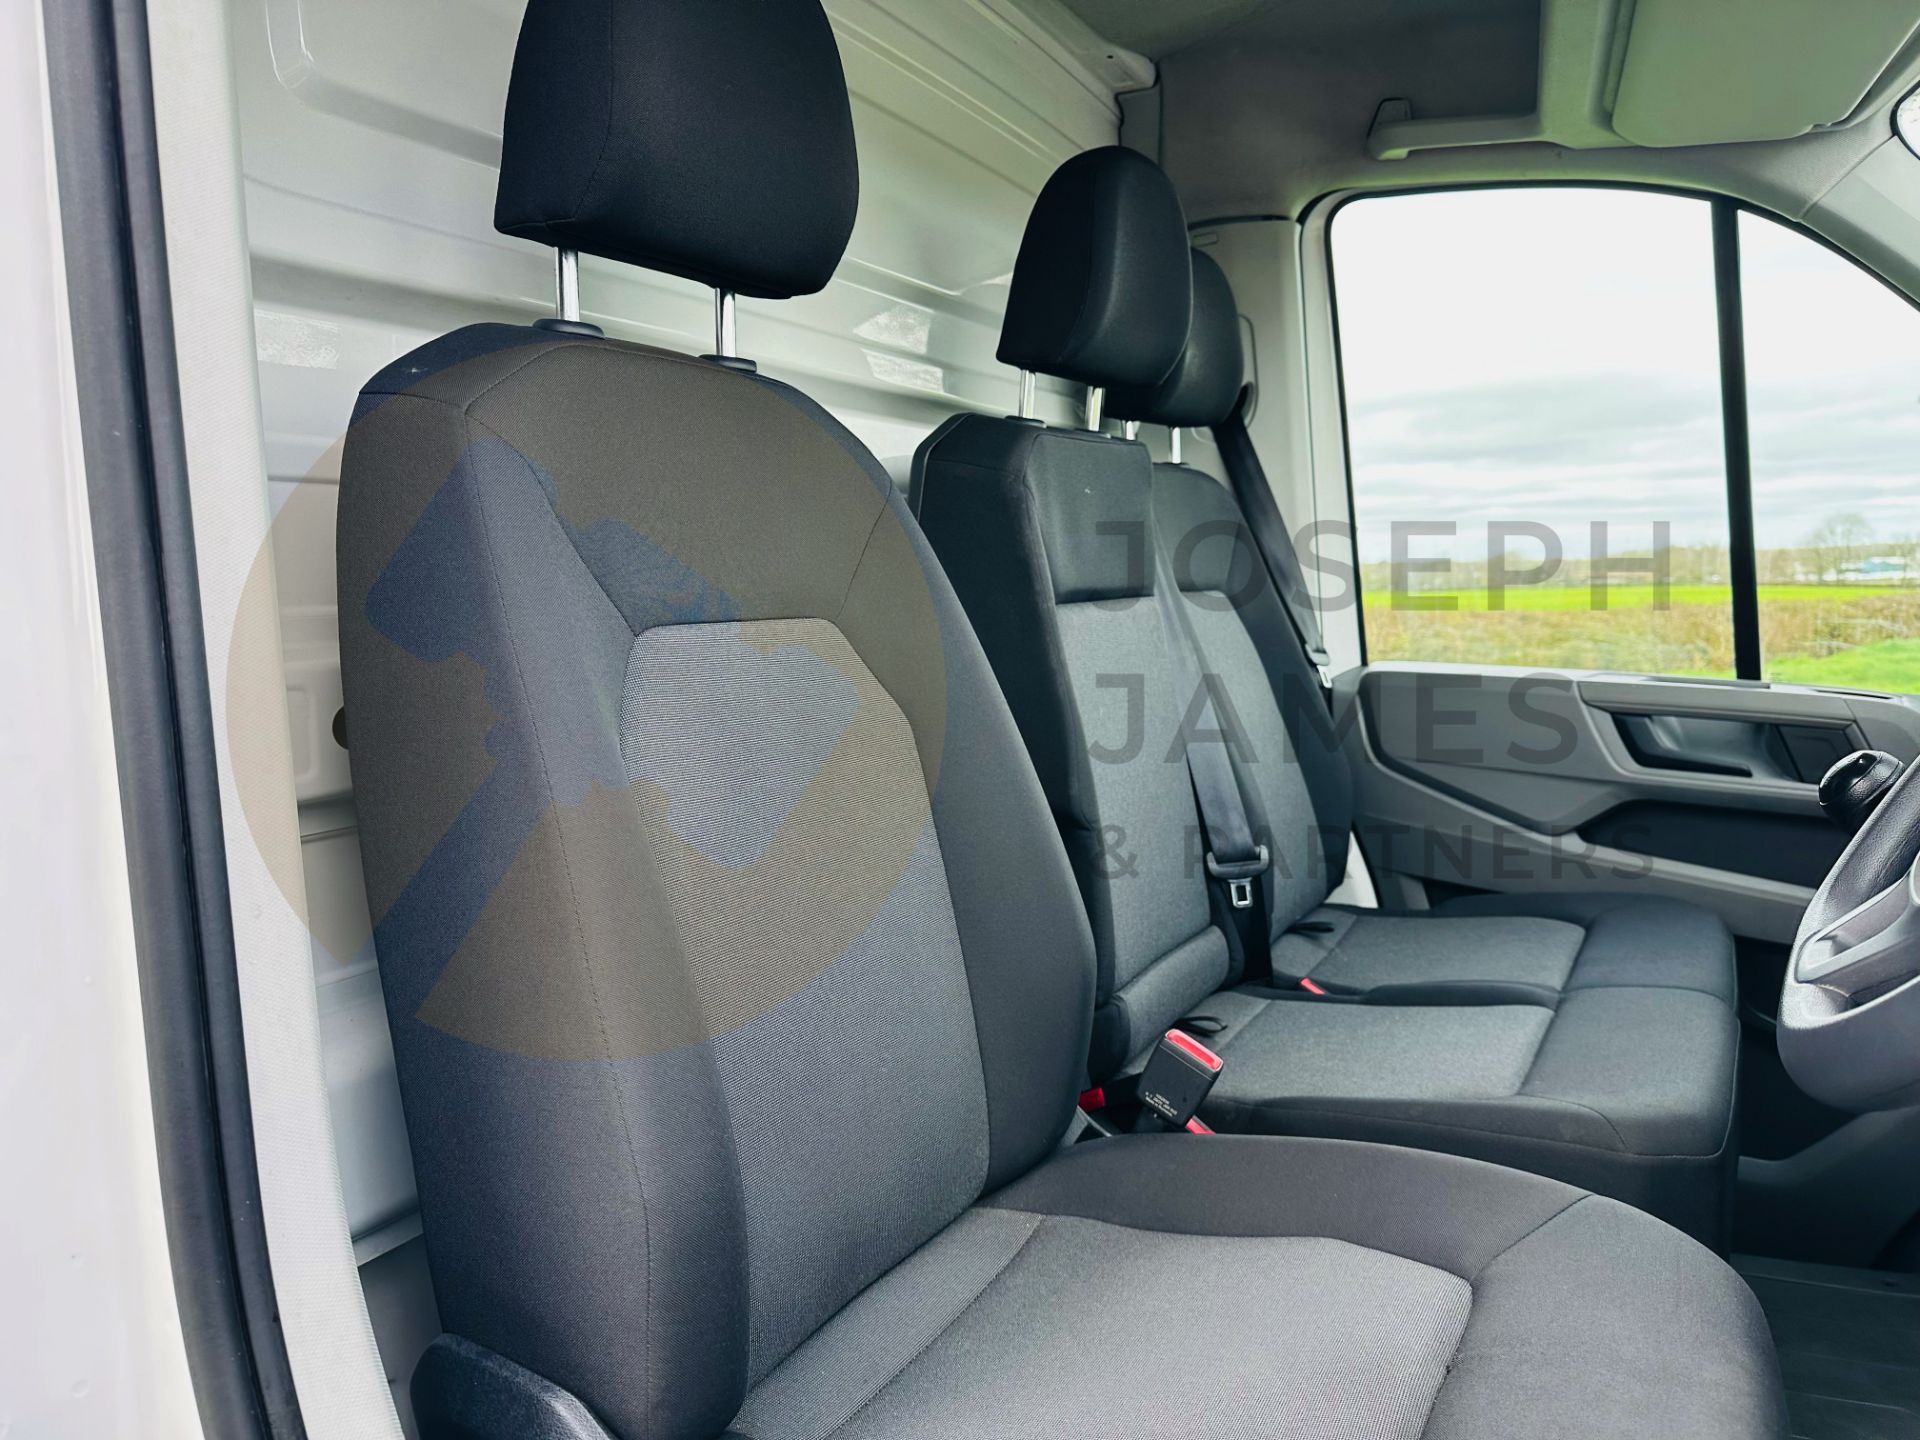 VOLKSWAGEN CRAFTER 2.0 TDI (140) LWB LUTON WITH TAIL LIFT (2021 MODEL) 1 OWNER - LOW MILES - AIR CON - Image 19 of 27